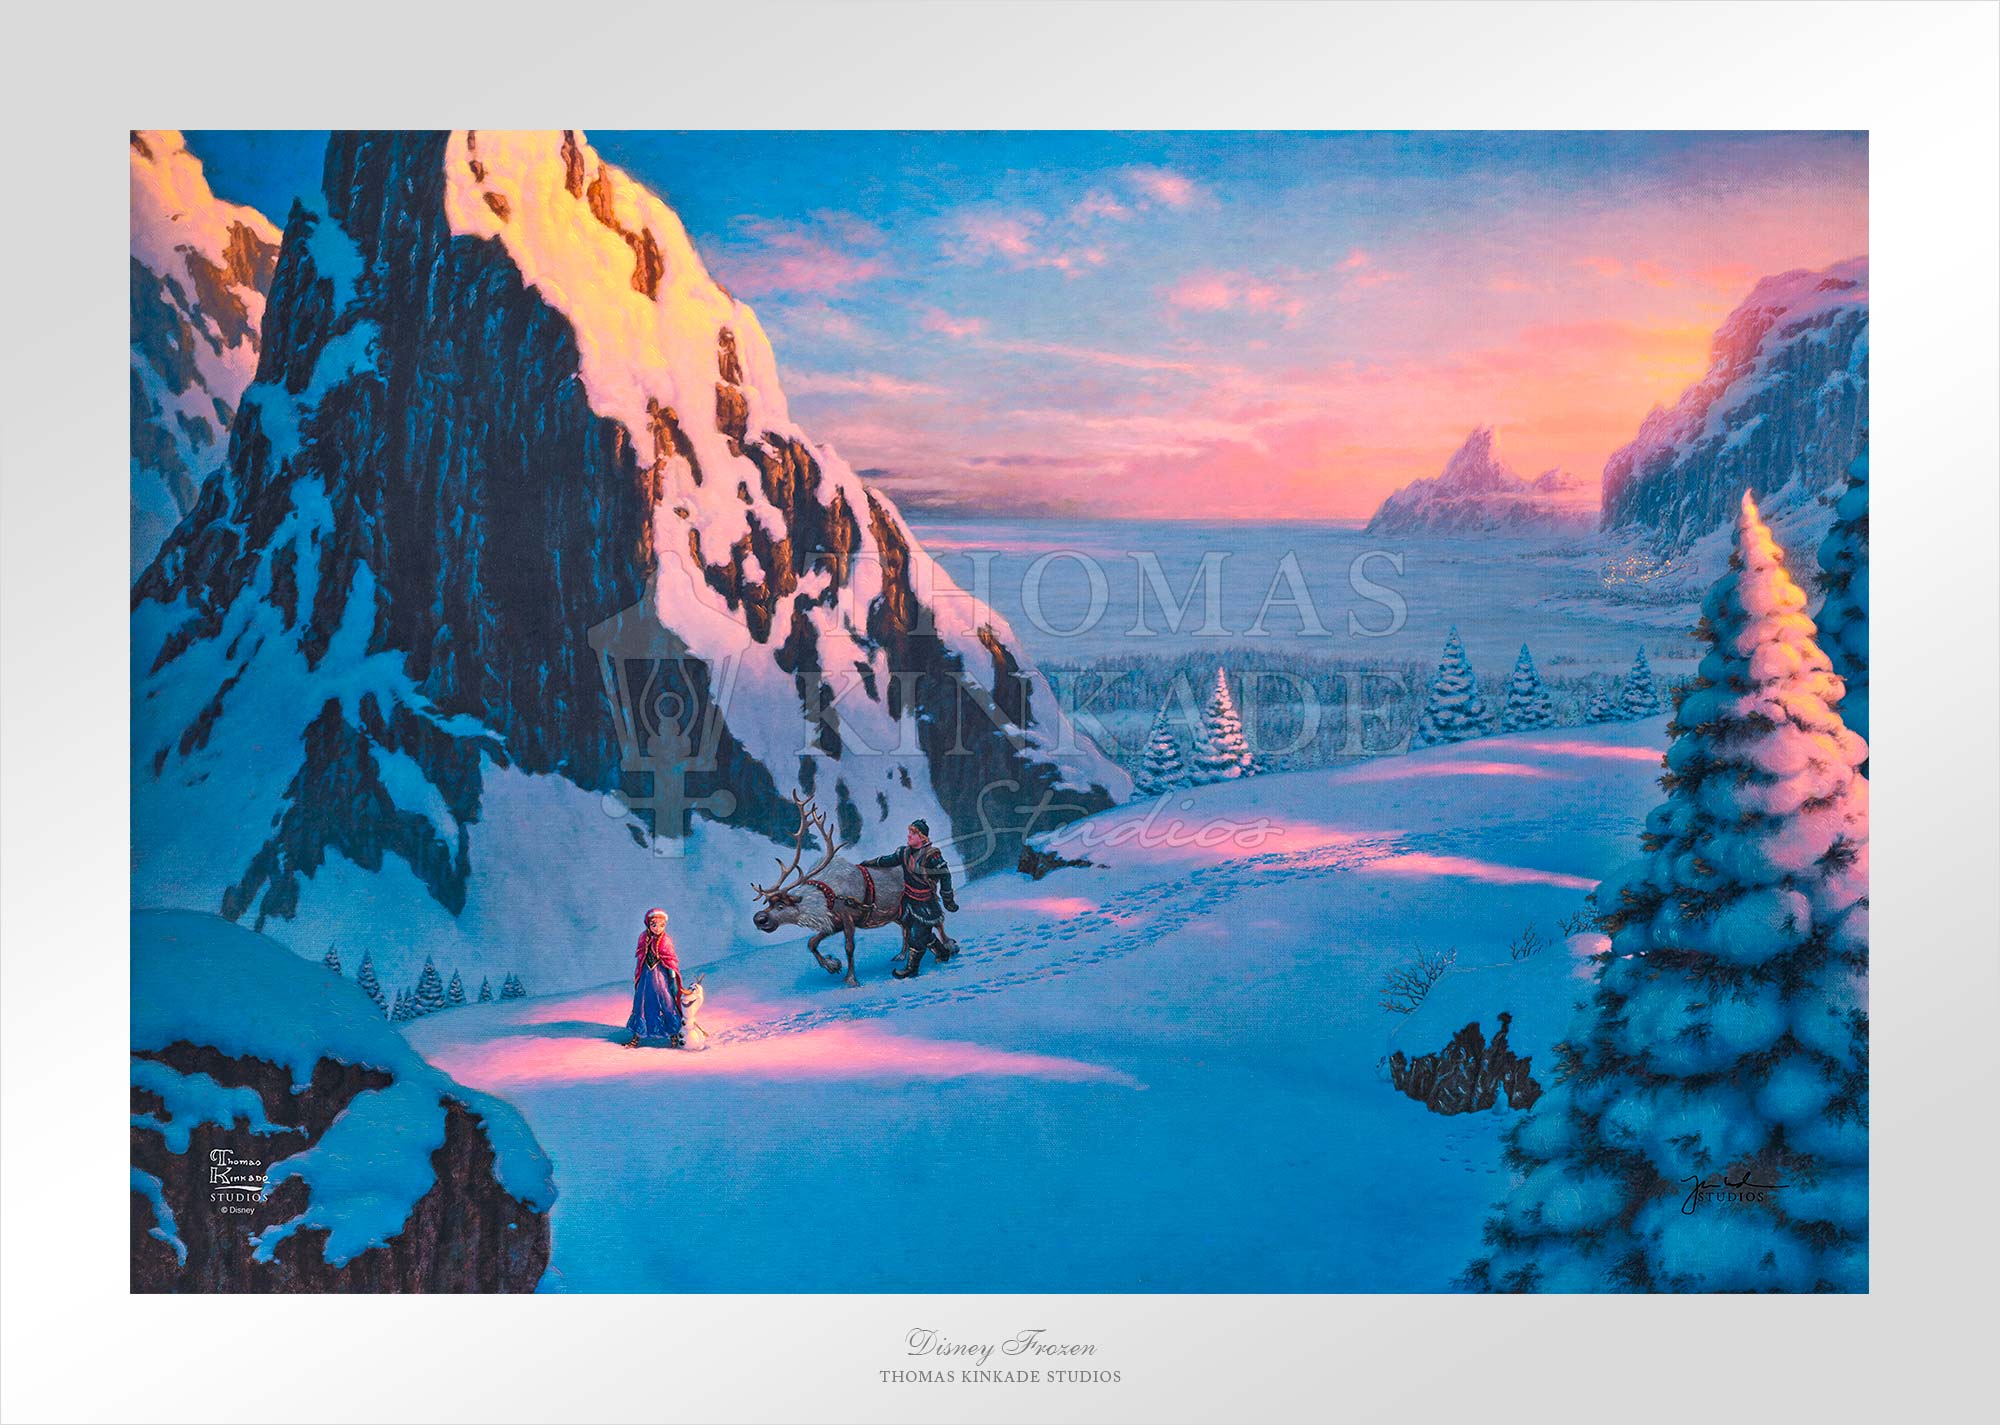 Disney Frozen by Thomas Kinkade Studios.  This scene takes Anna, Olaf joined by Kristoff, and his friend Sven on their journey the through the snowy slopes of Alpine. - Unframed